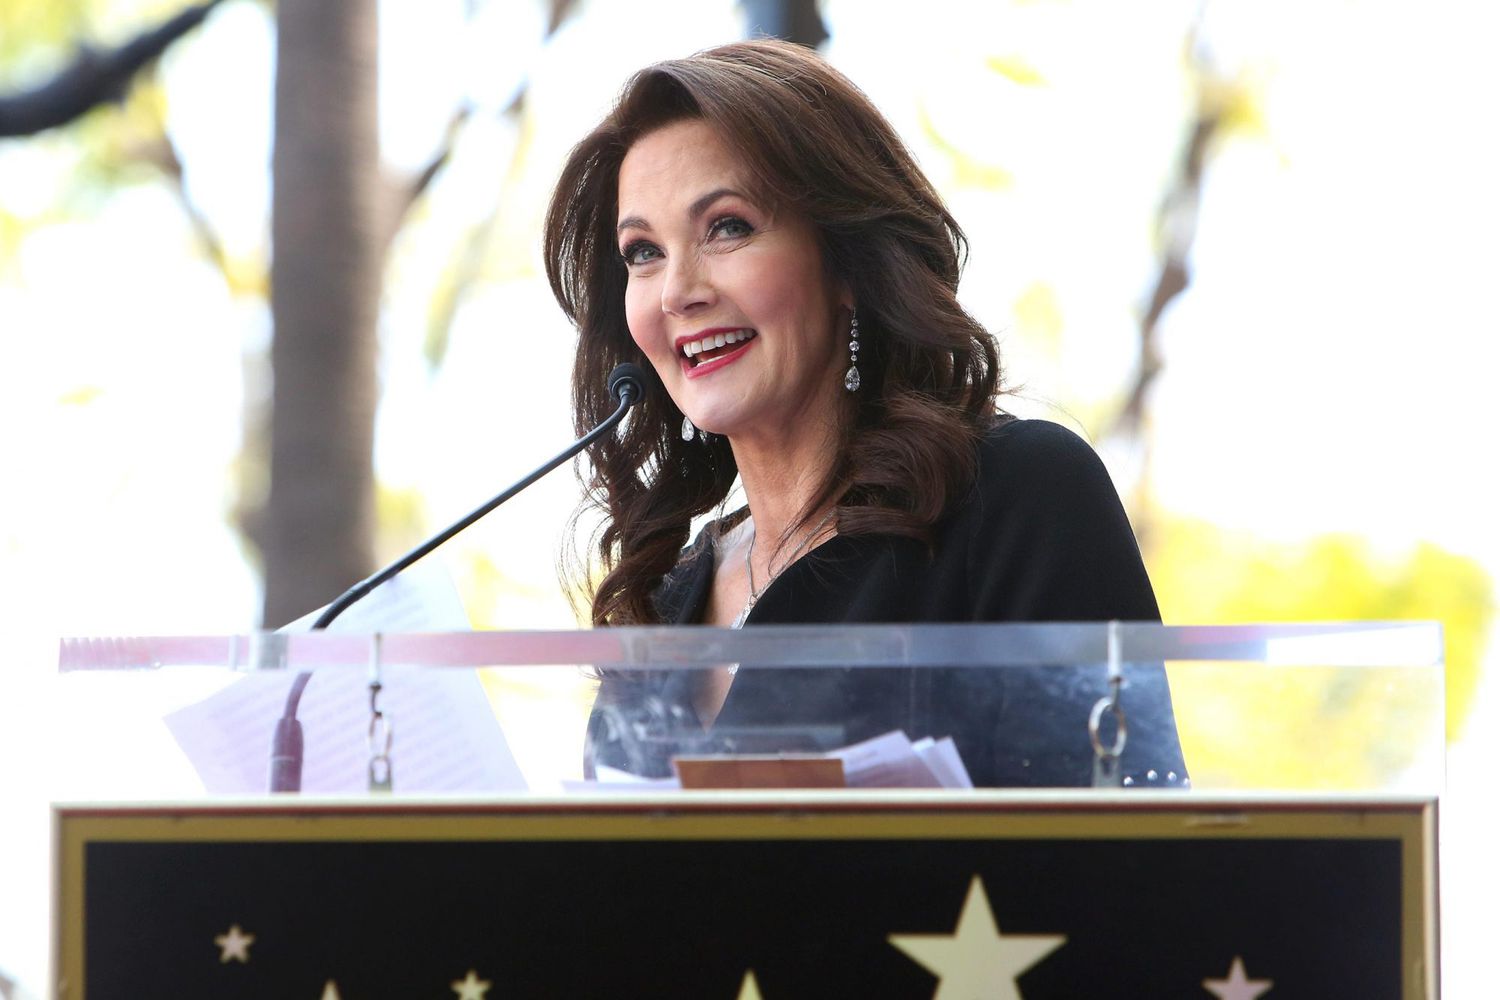 Lynda Carter honored with a star on the Hollywood Walk of Fame, Los Angeles, USA - 03 Apr 2018